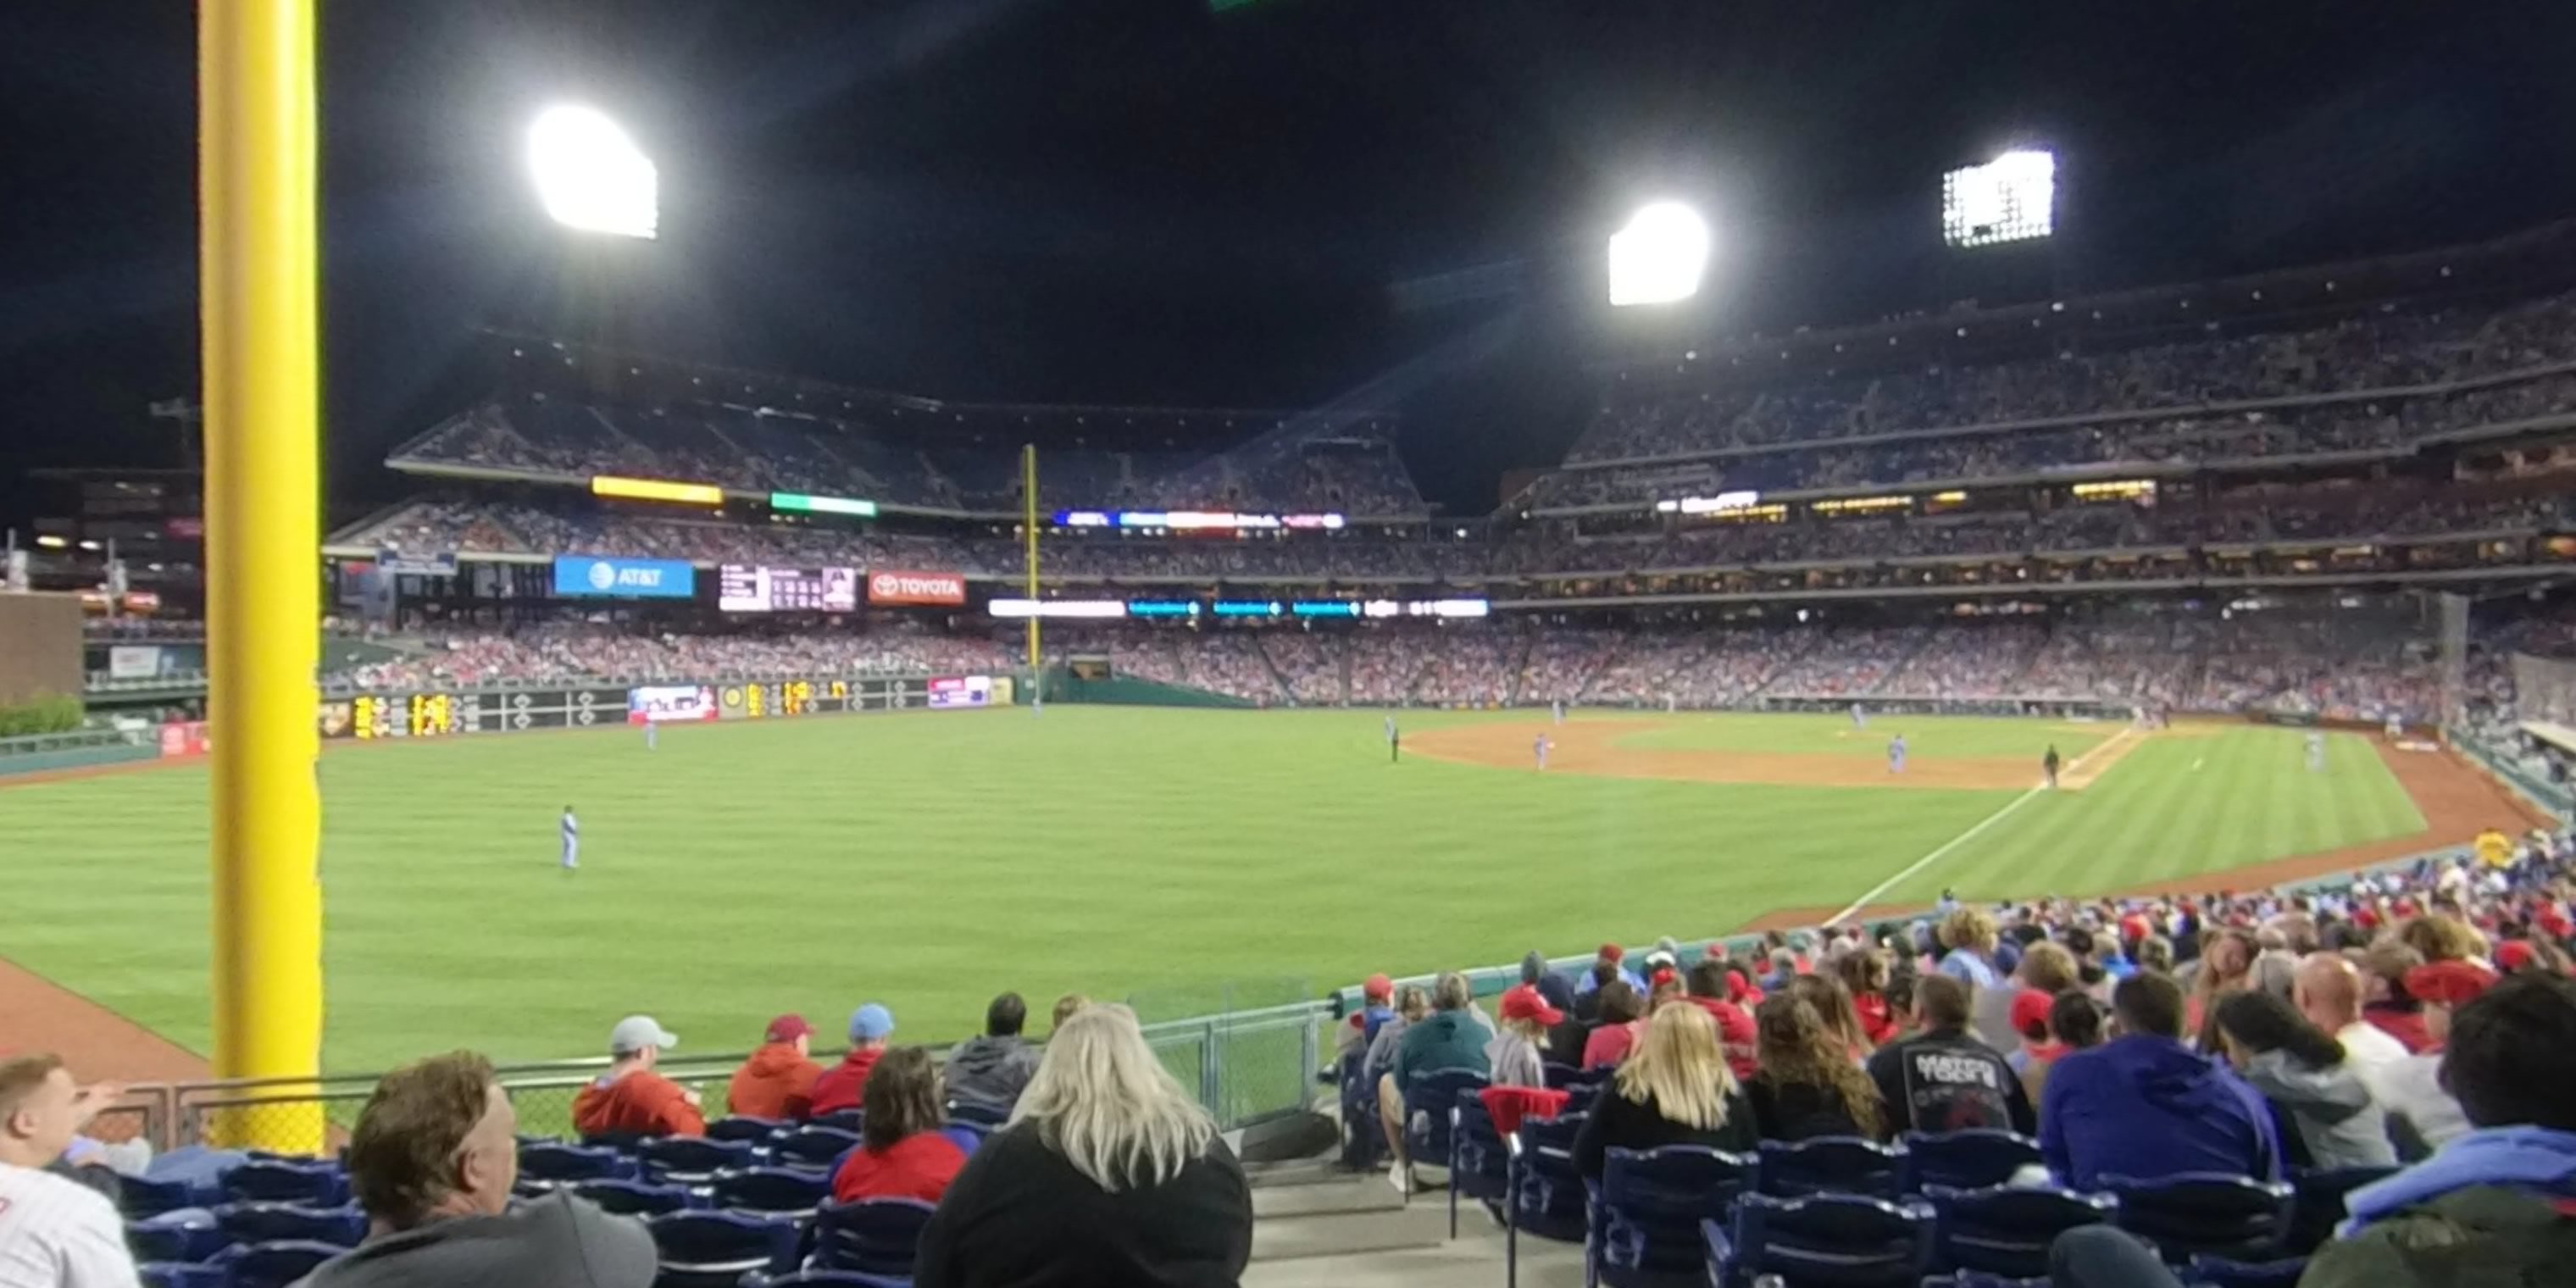 section 138 panoramic seat view  for baseball - citizens bank park